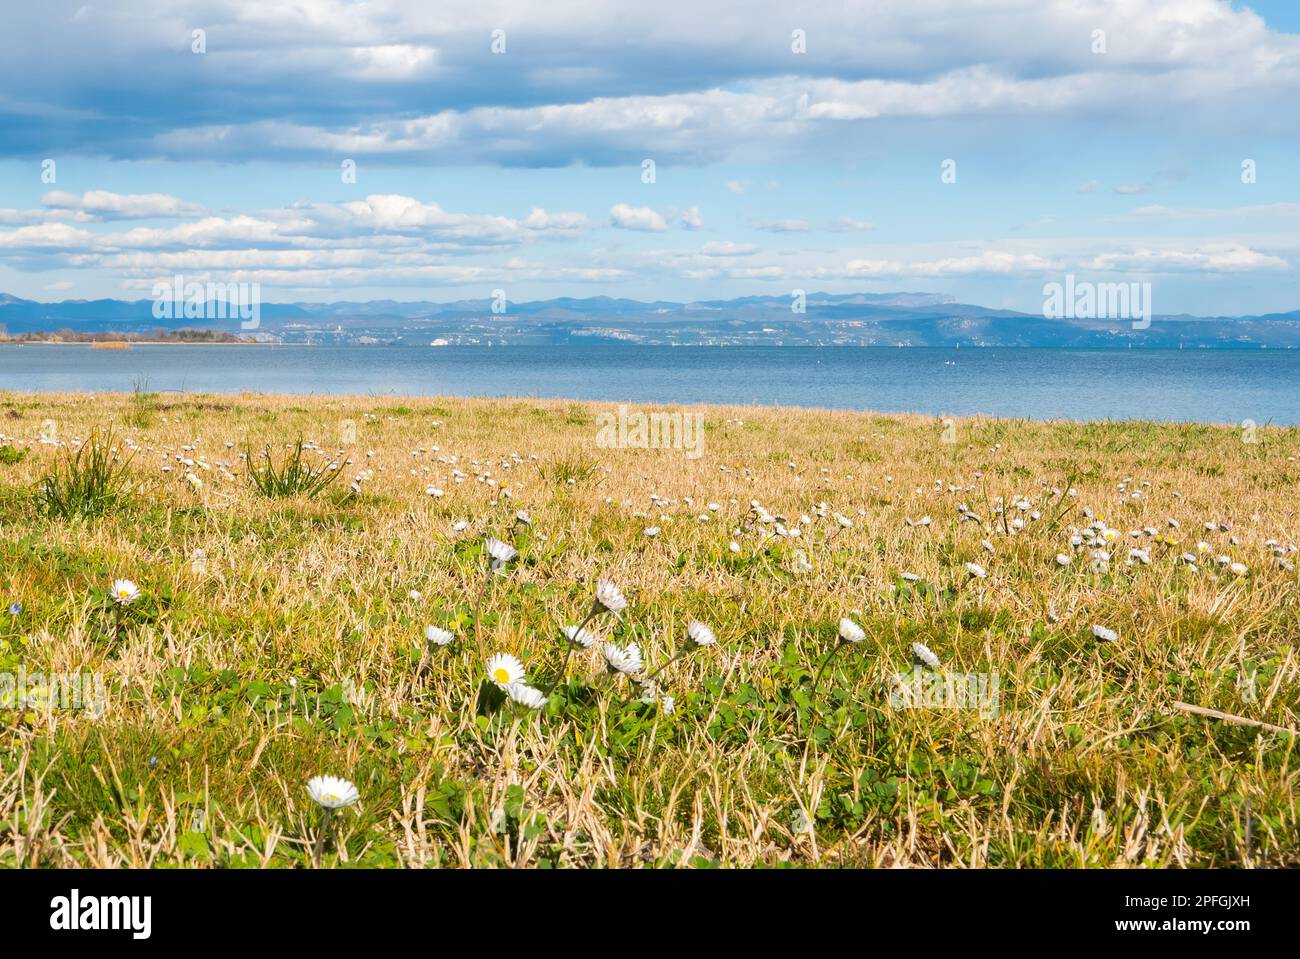 The coastline near Grado (Italy) in early spring with daisies flowers Stock Photo